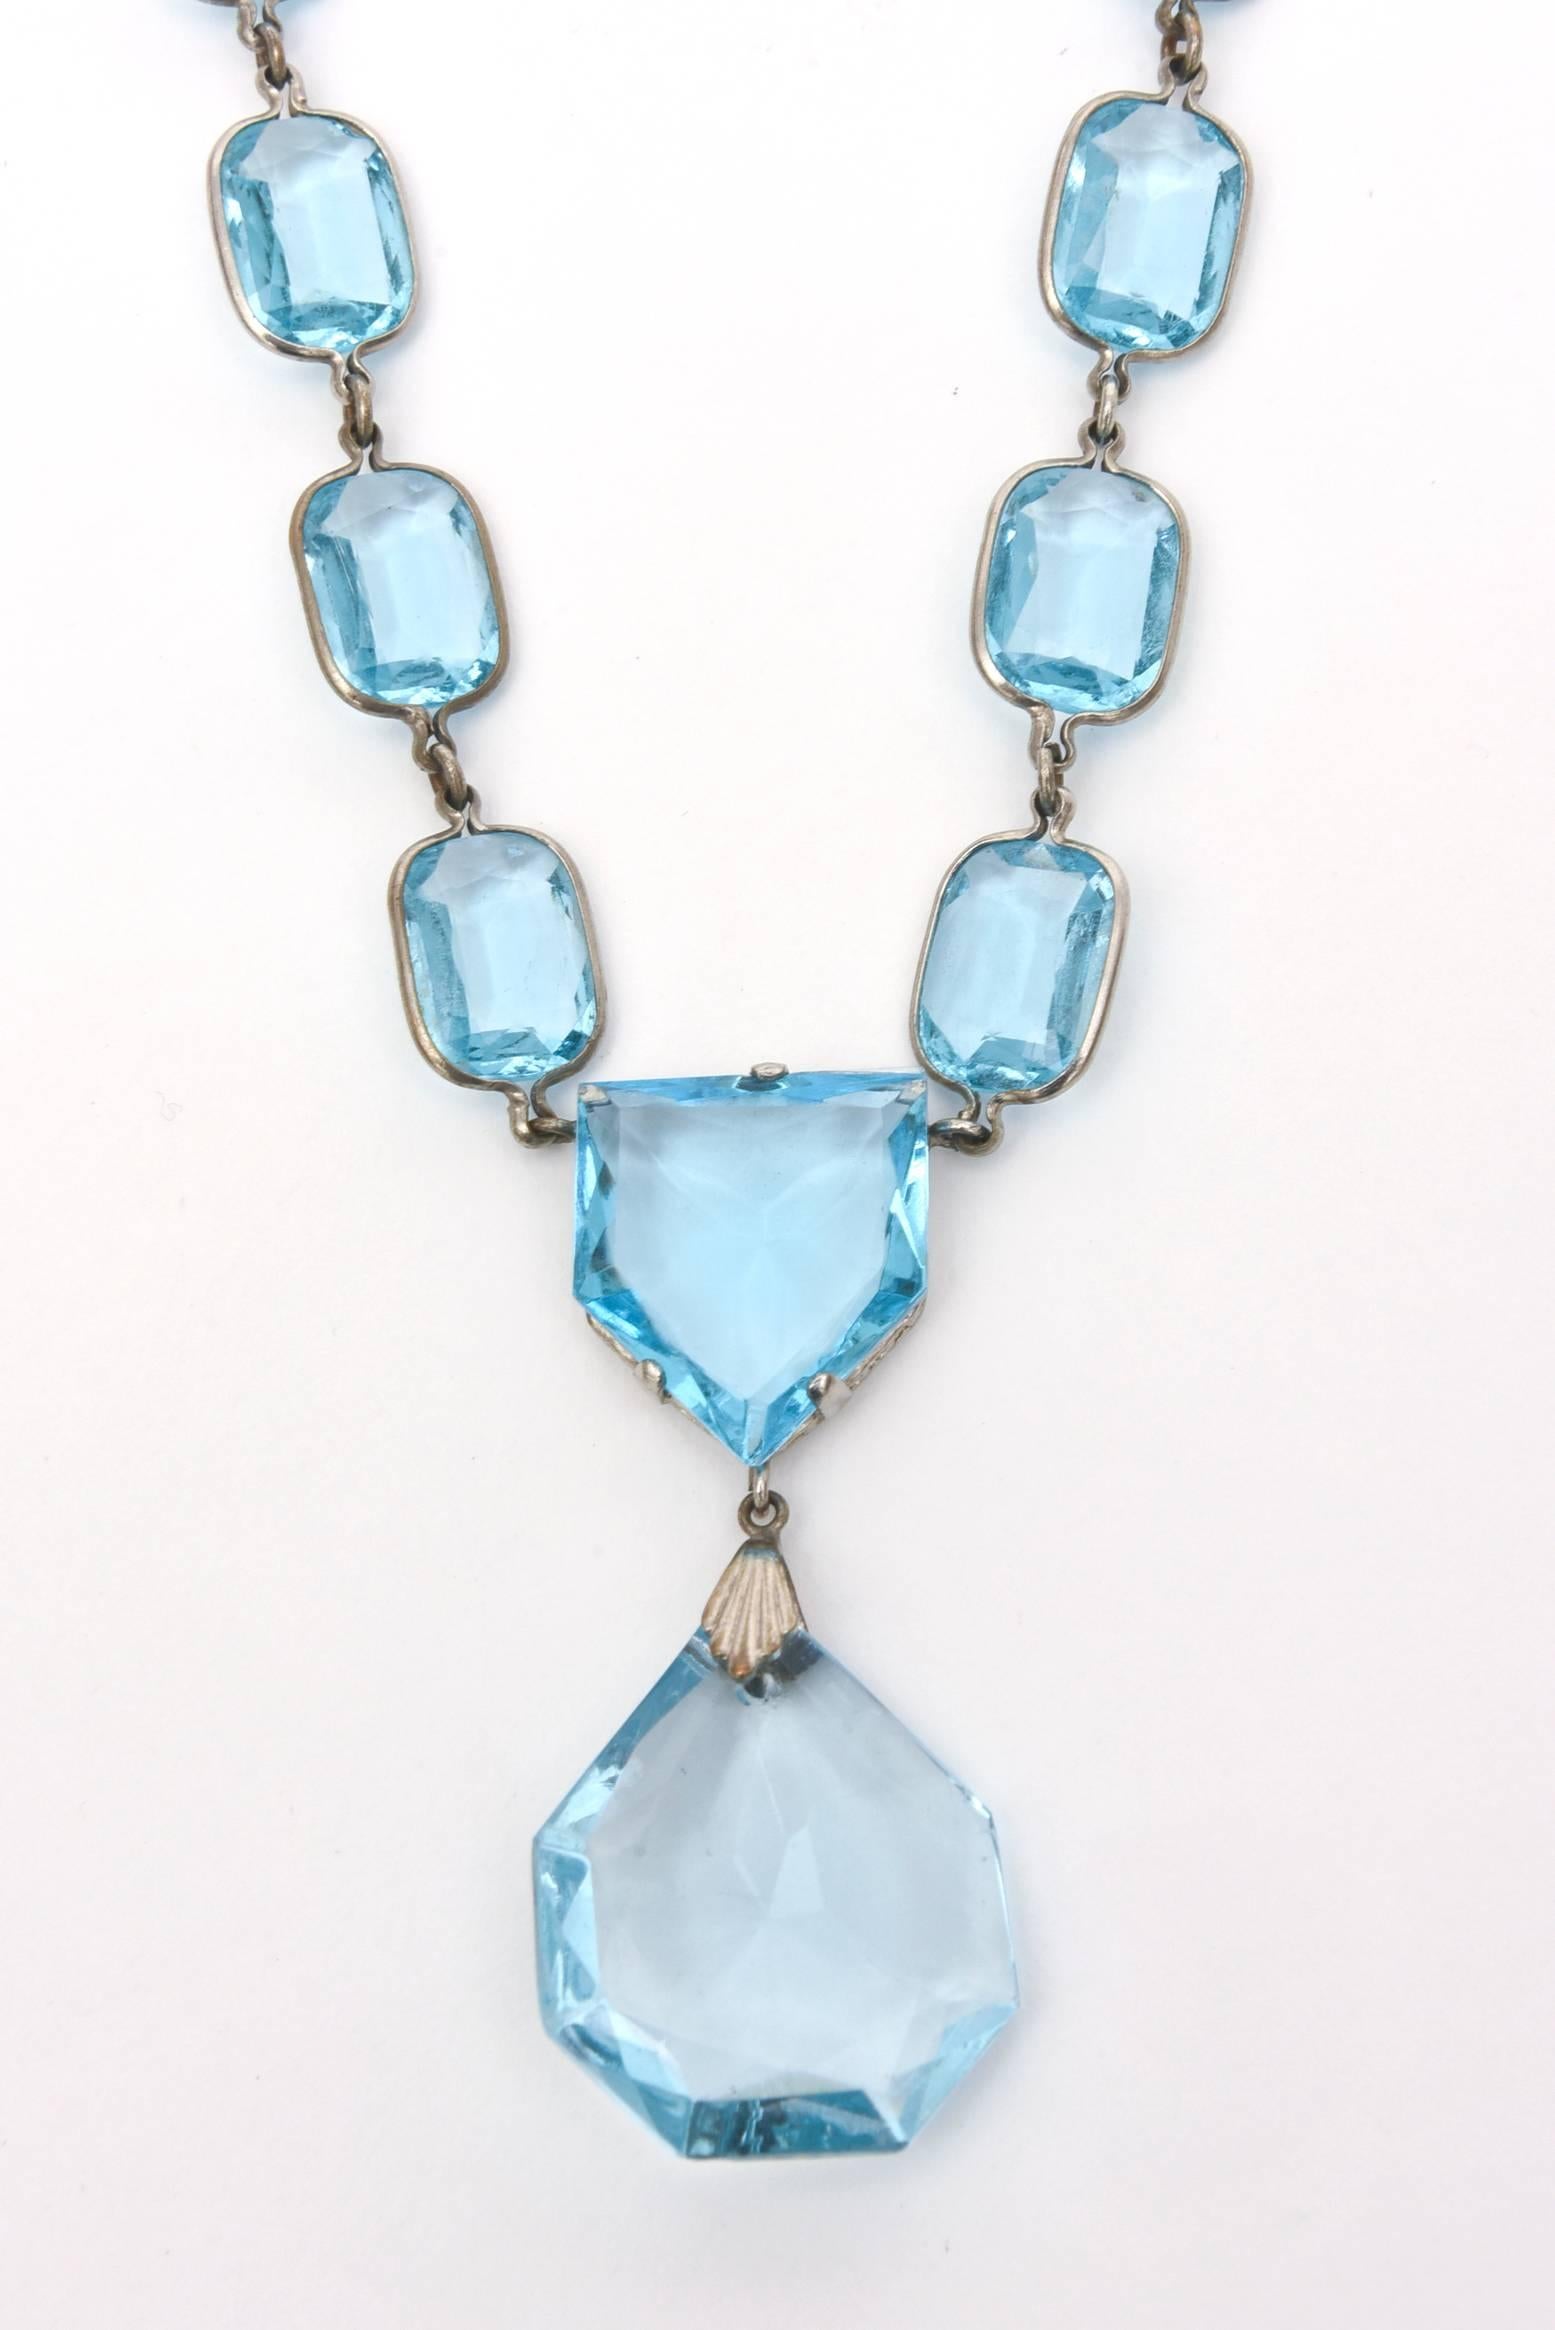 Women's Faceted Glass Crystal Aquamarine/ Sterling Silver Pendant Necklace/ SALE